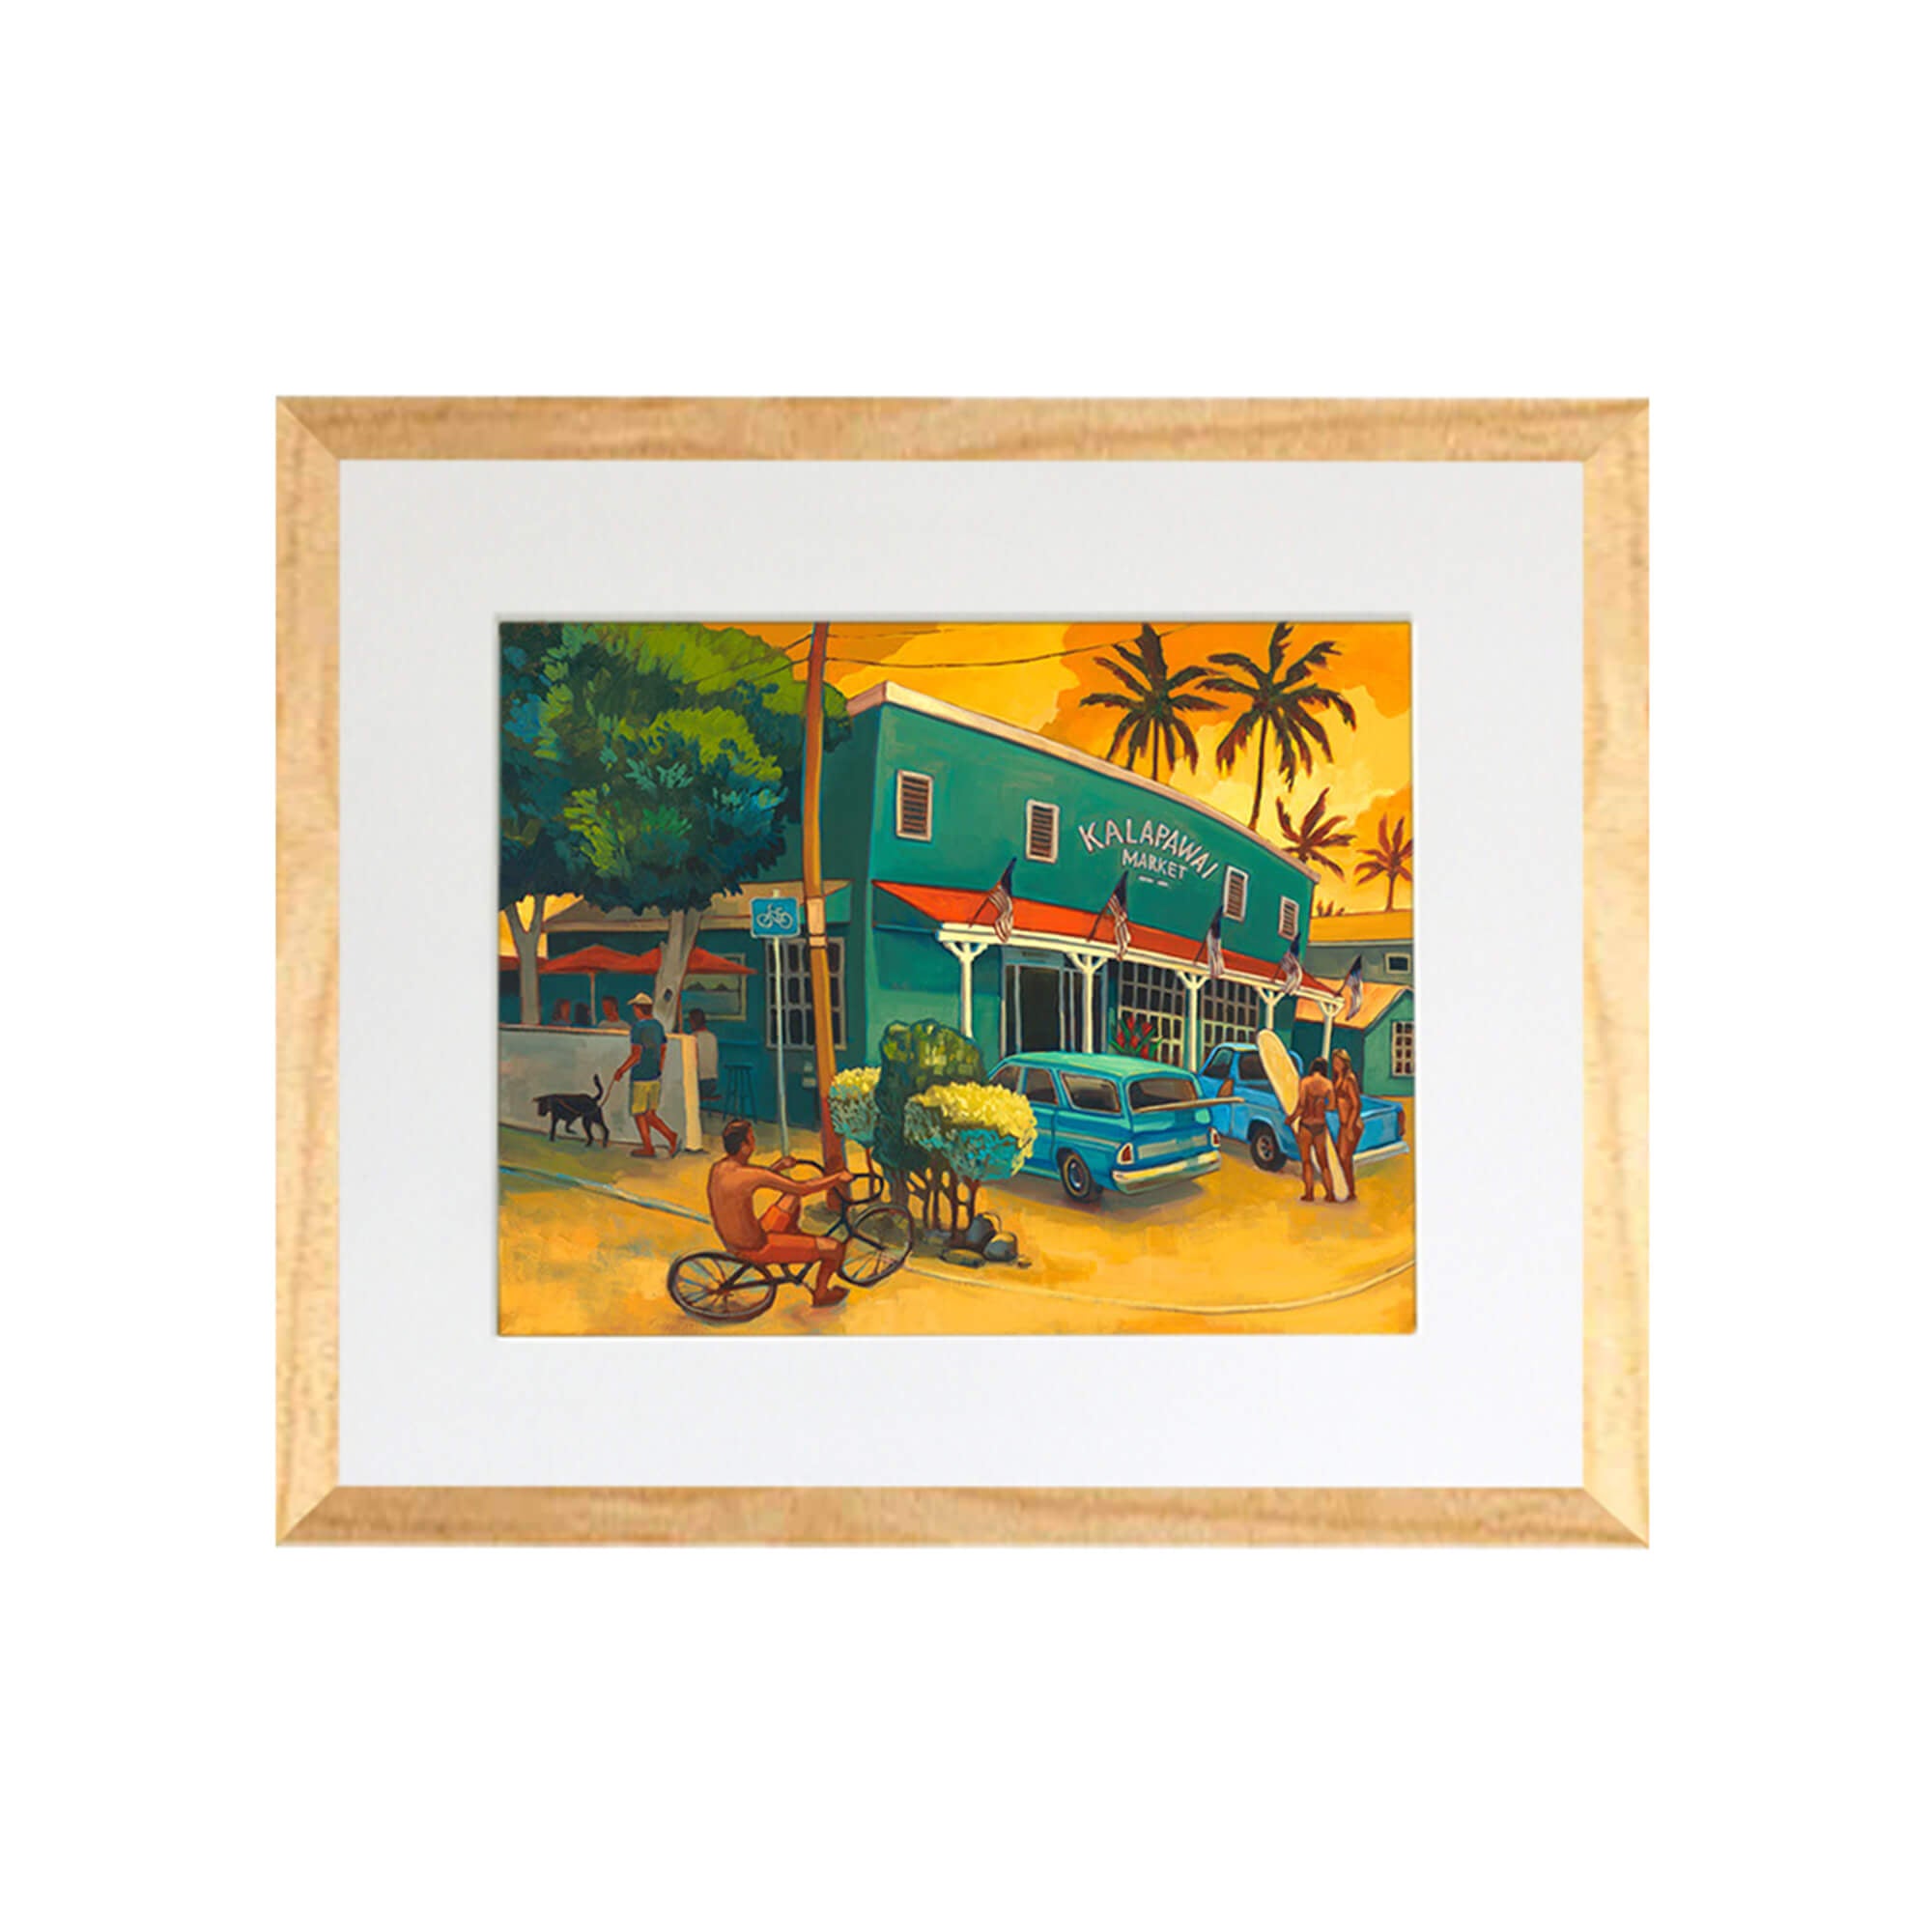 A vibrant depiction of the famous landmark Kalapawai market in Hawaii by Hawaii artist Colin Redican